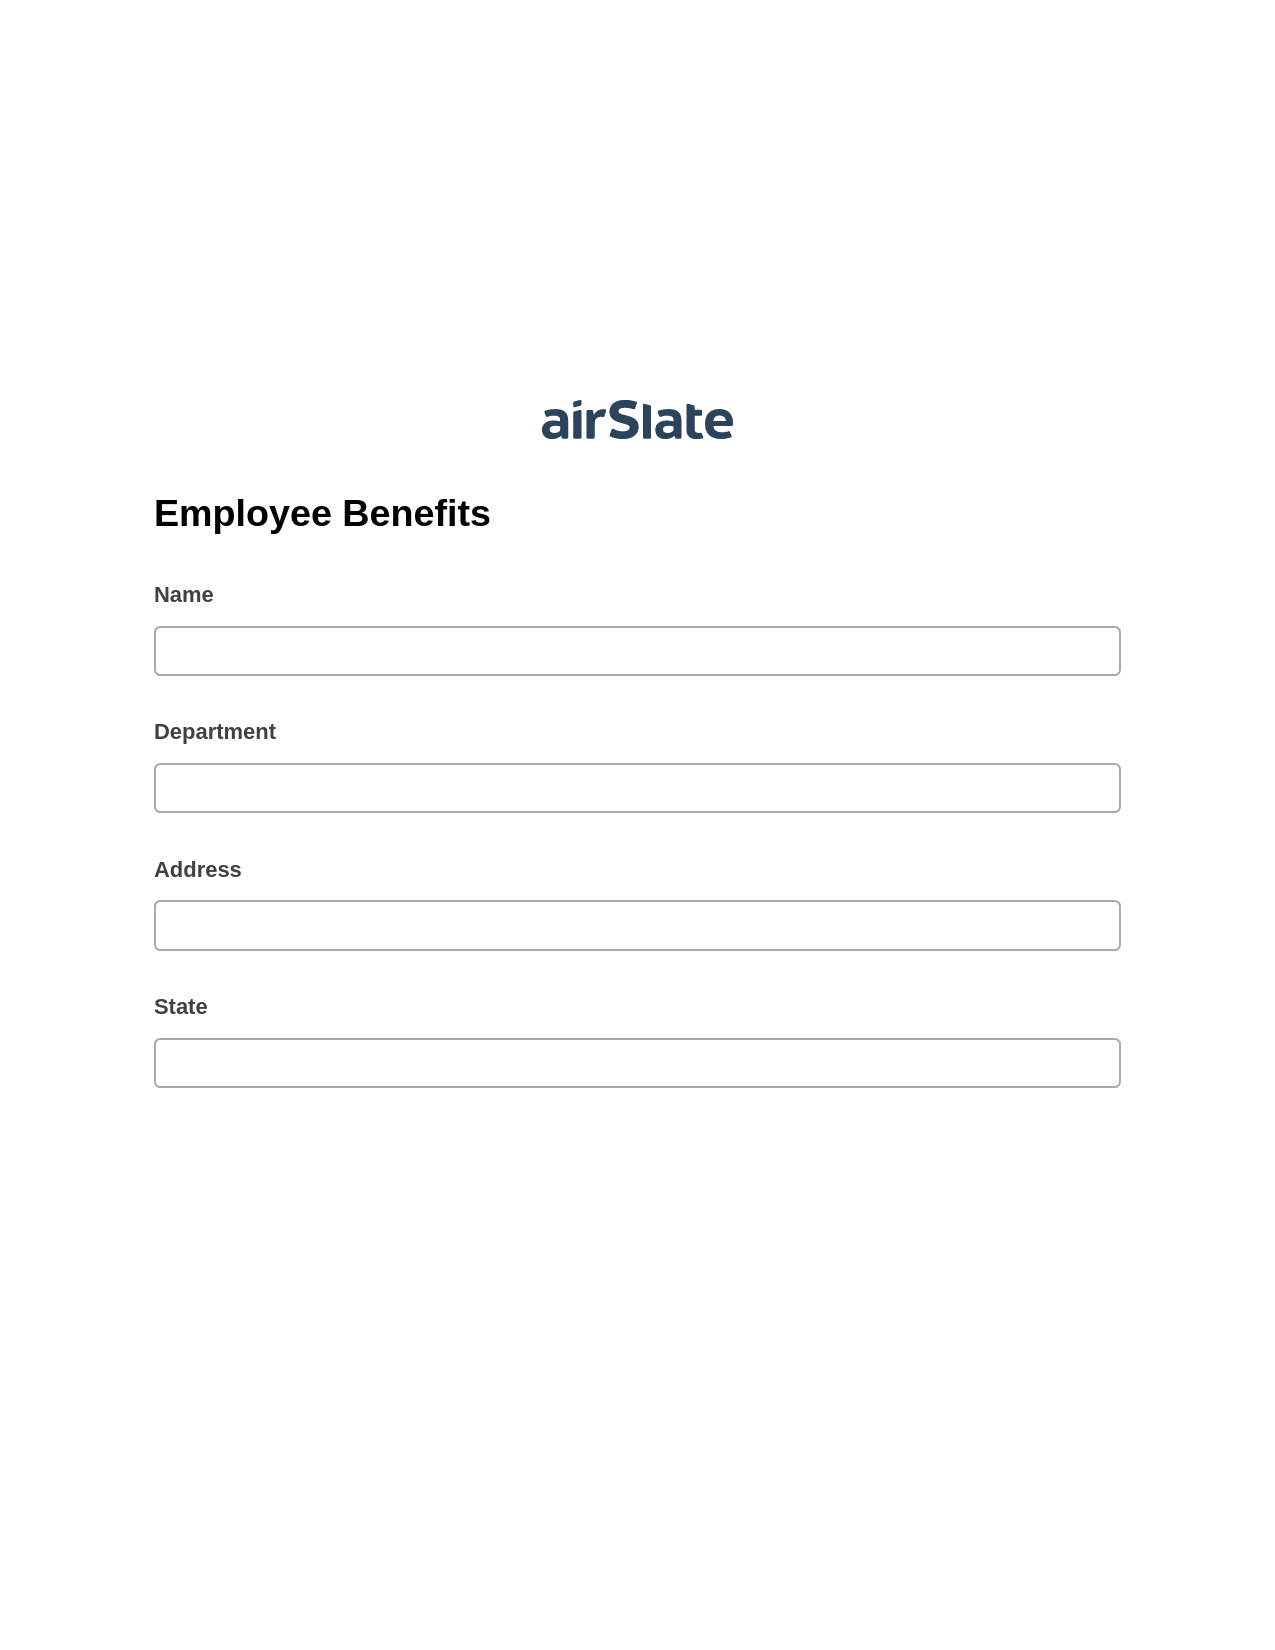 Employee Benefits Pre-fill from NetSuite Records Bot, Set Signature Type Bot, Export to Formstack Documents Bot